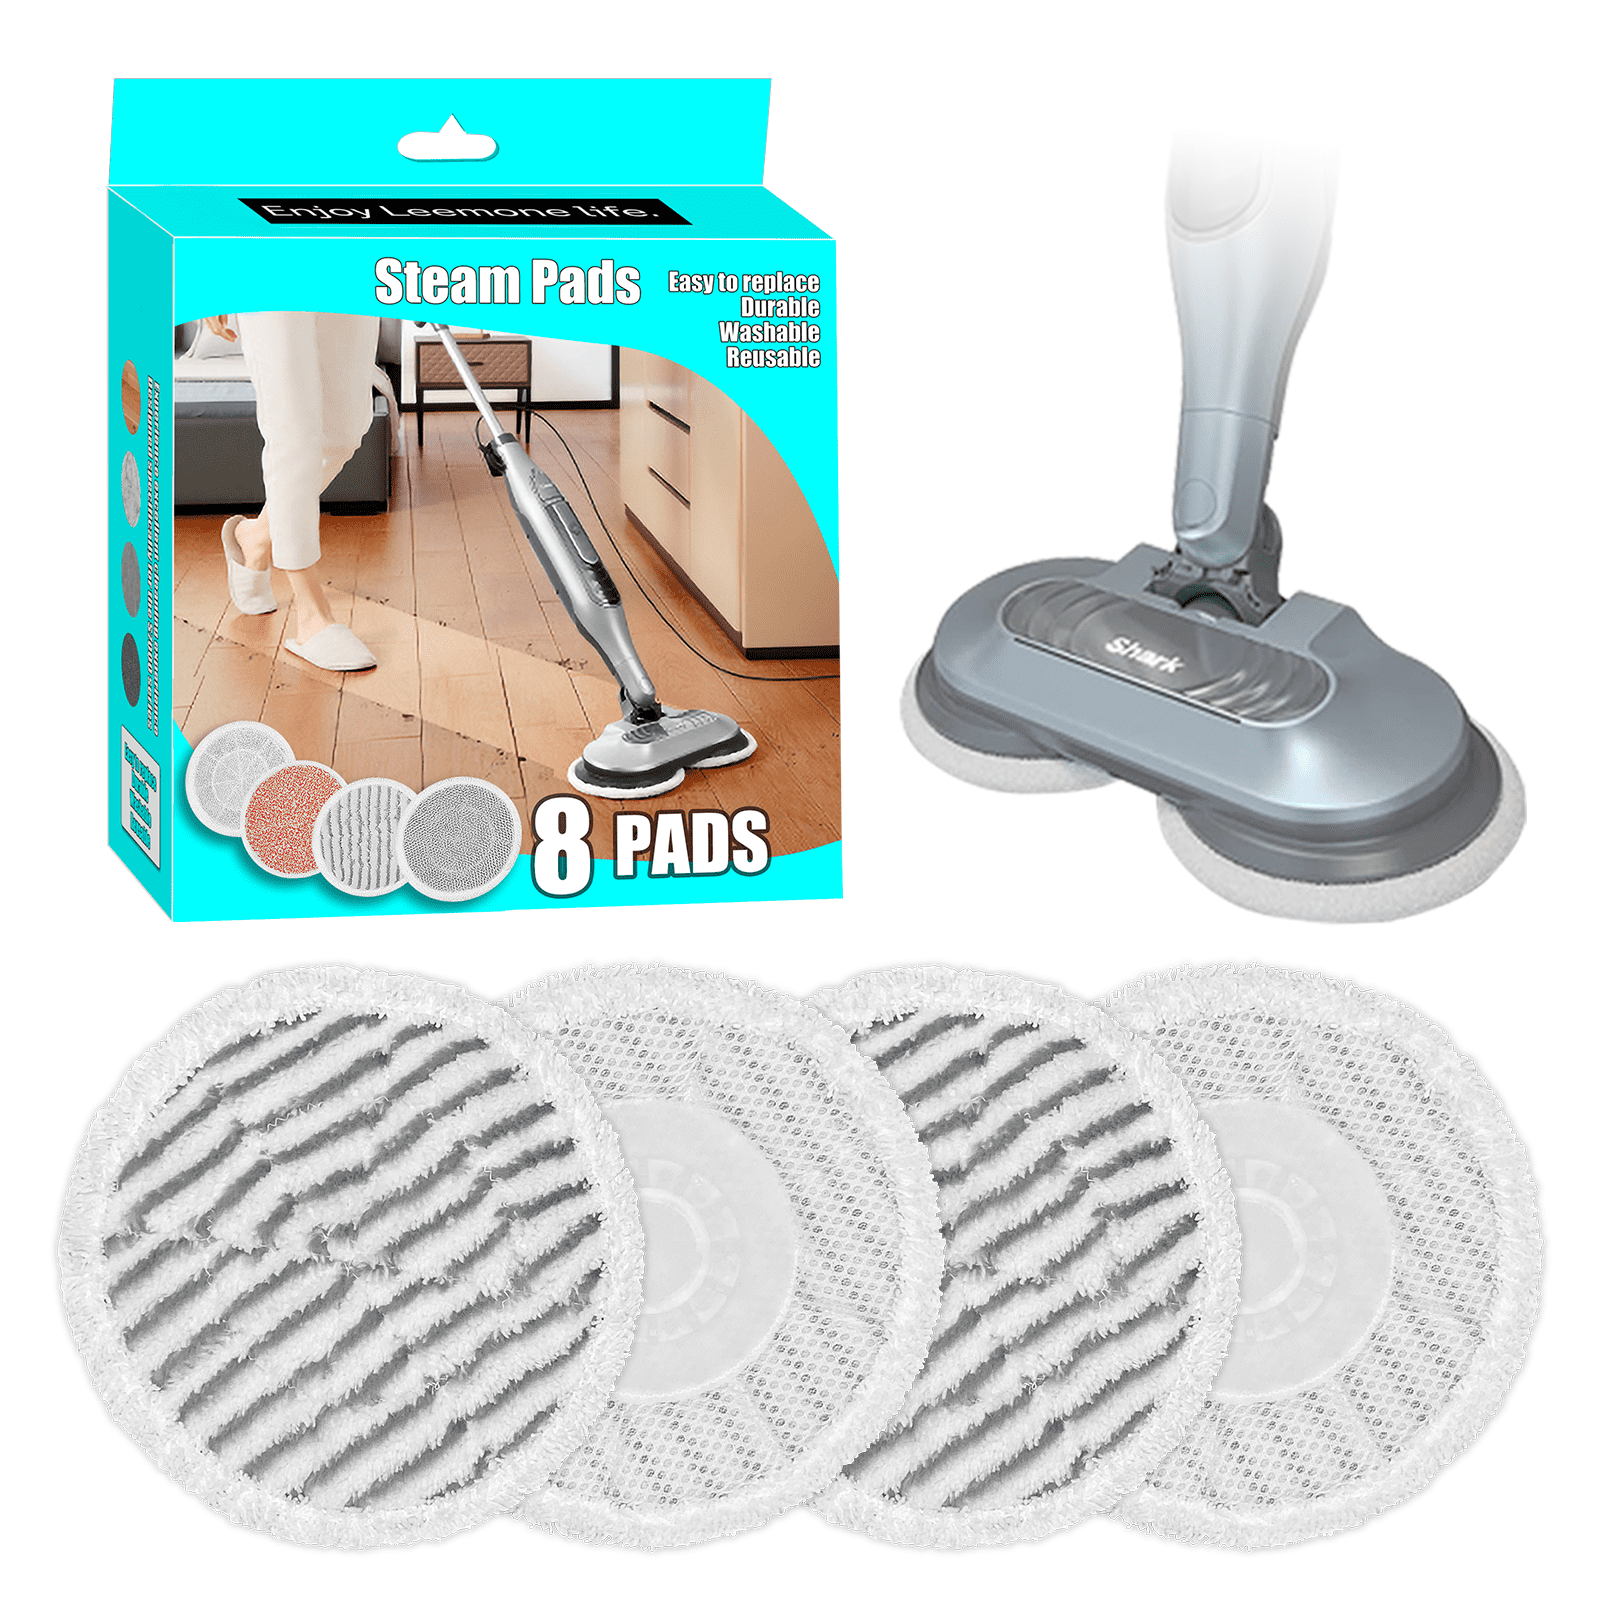 for Black and Decker Steam Mop Pads for Fsmh13e10-gb Fsmh1321-gb - Pack of 3, Size: 27.8